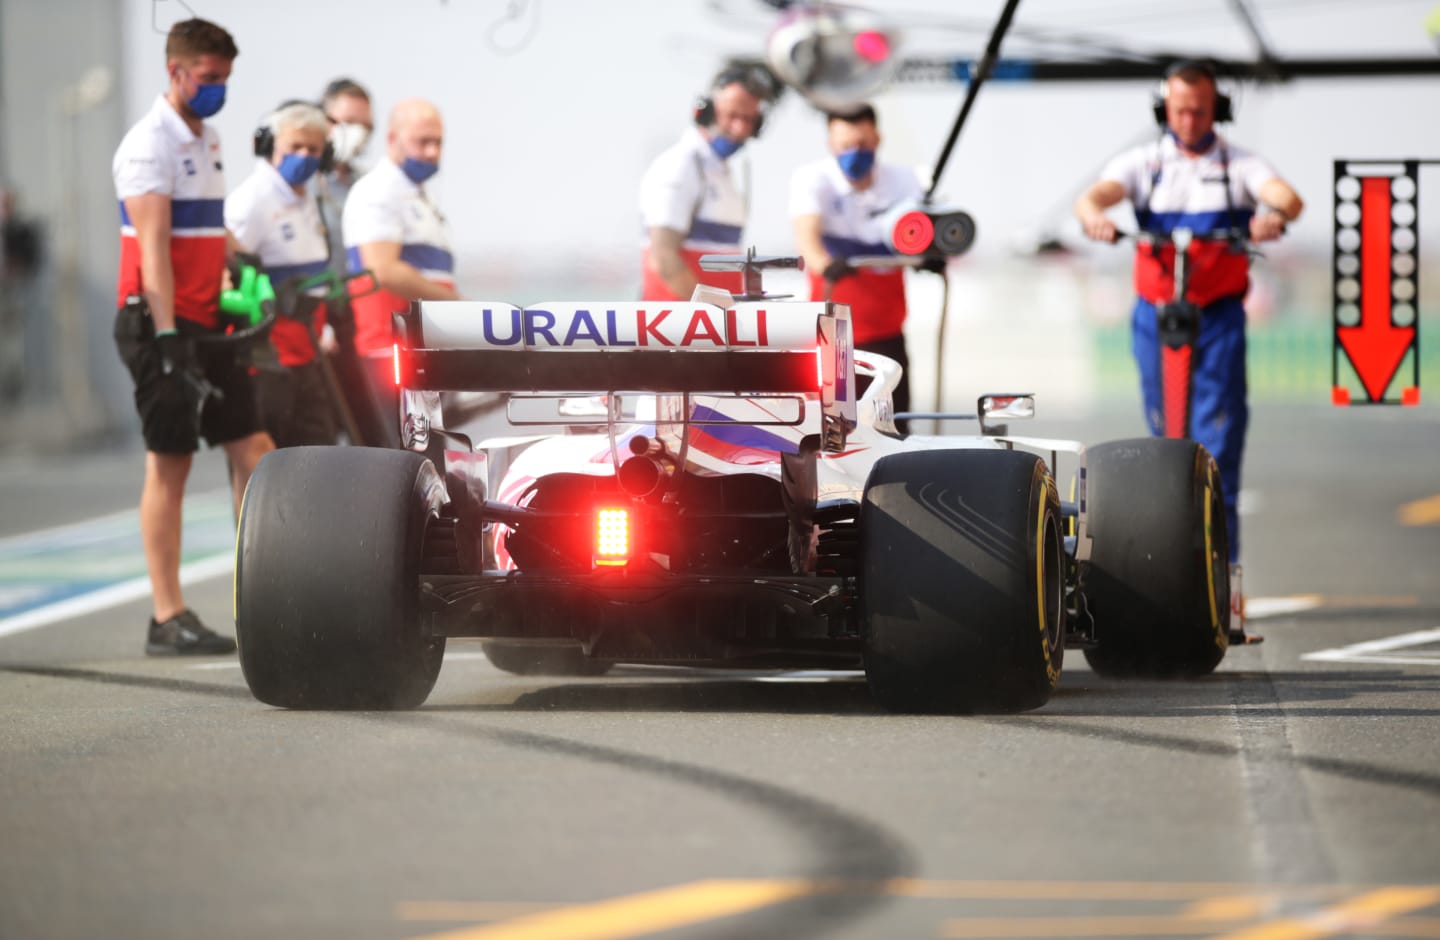 DOHA, QATAR - NOVEMBER 19: Nikita Mazepin of Russia driving the (9) Haas F1 Team VF-21 Ferrari in the Pitlane during practice ahead of the F1 Grand Prix of Qatar at Losail International Circuit on November 19, 2021 in Doha, Qatar. (Photo by Peter Fox/Getty Images)